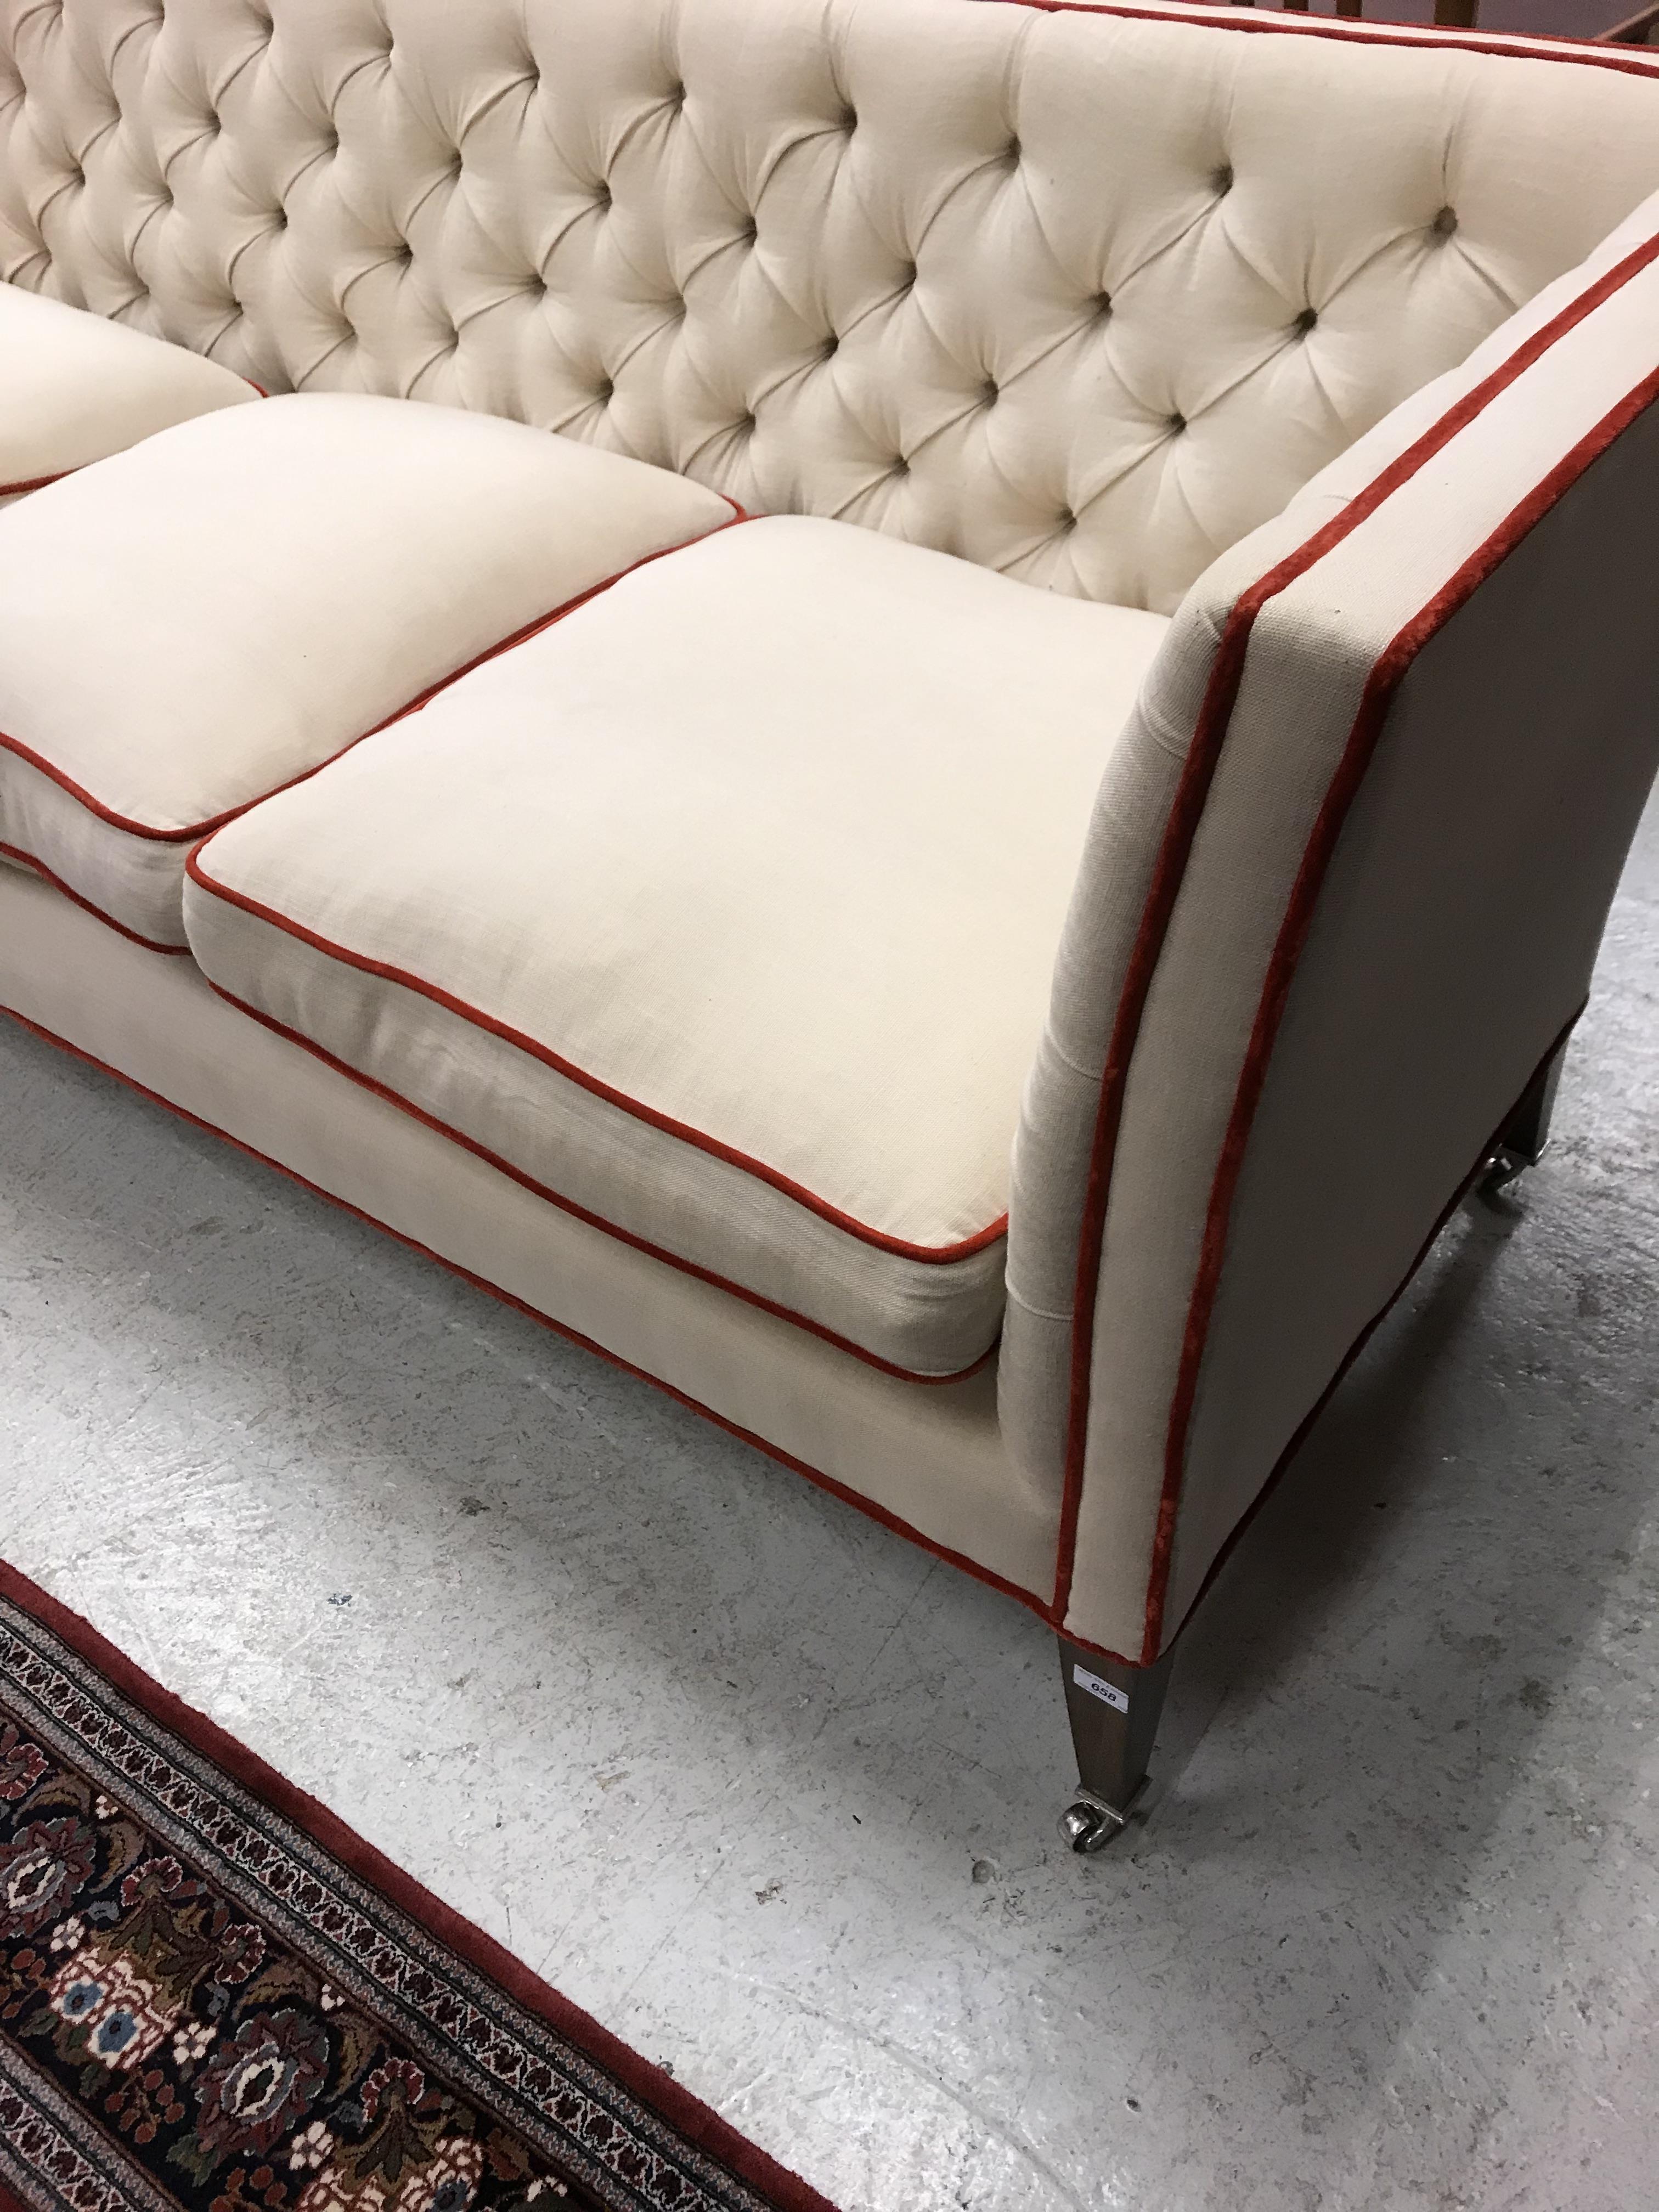 A Lawson Wood cream buttoned knowle style three seat sofa with scarlet velvet piping, - Image 15 of 26